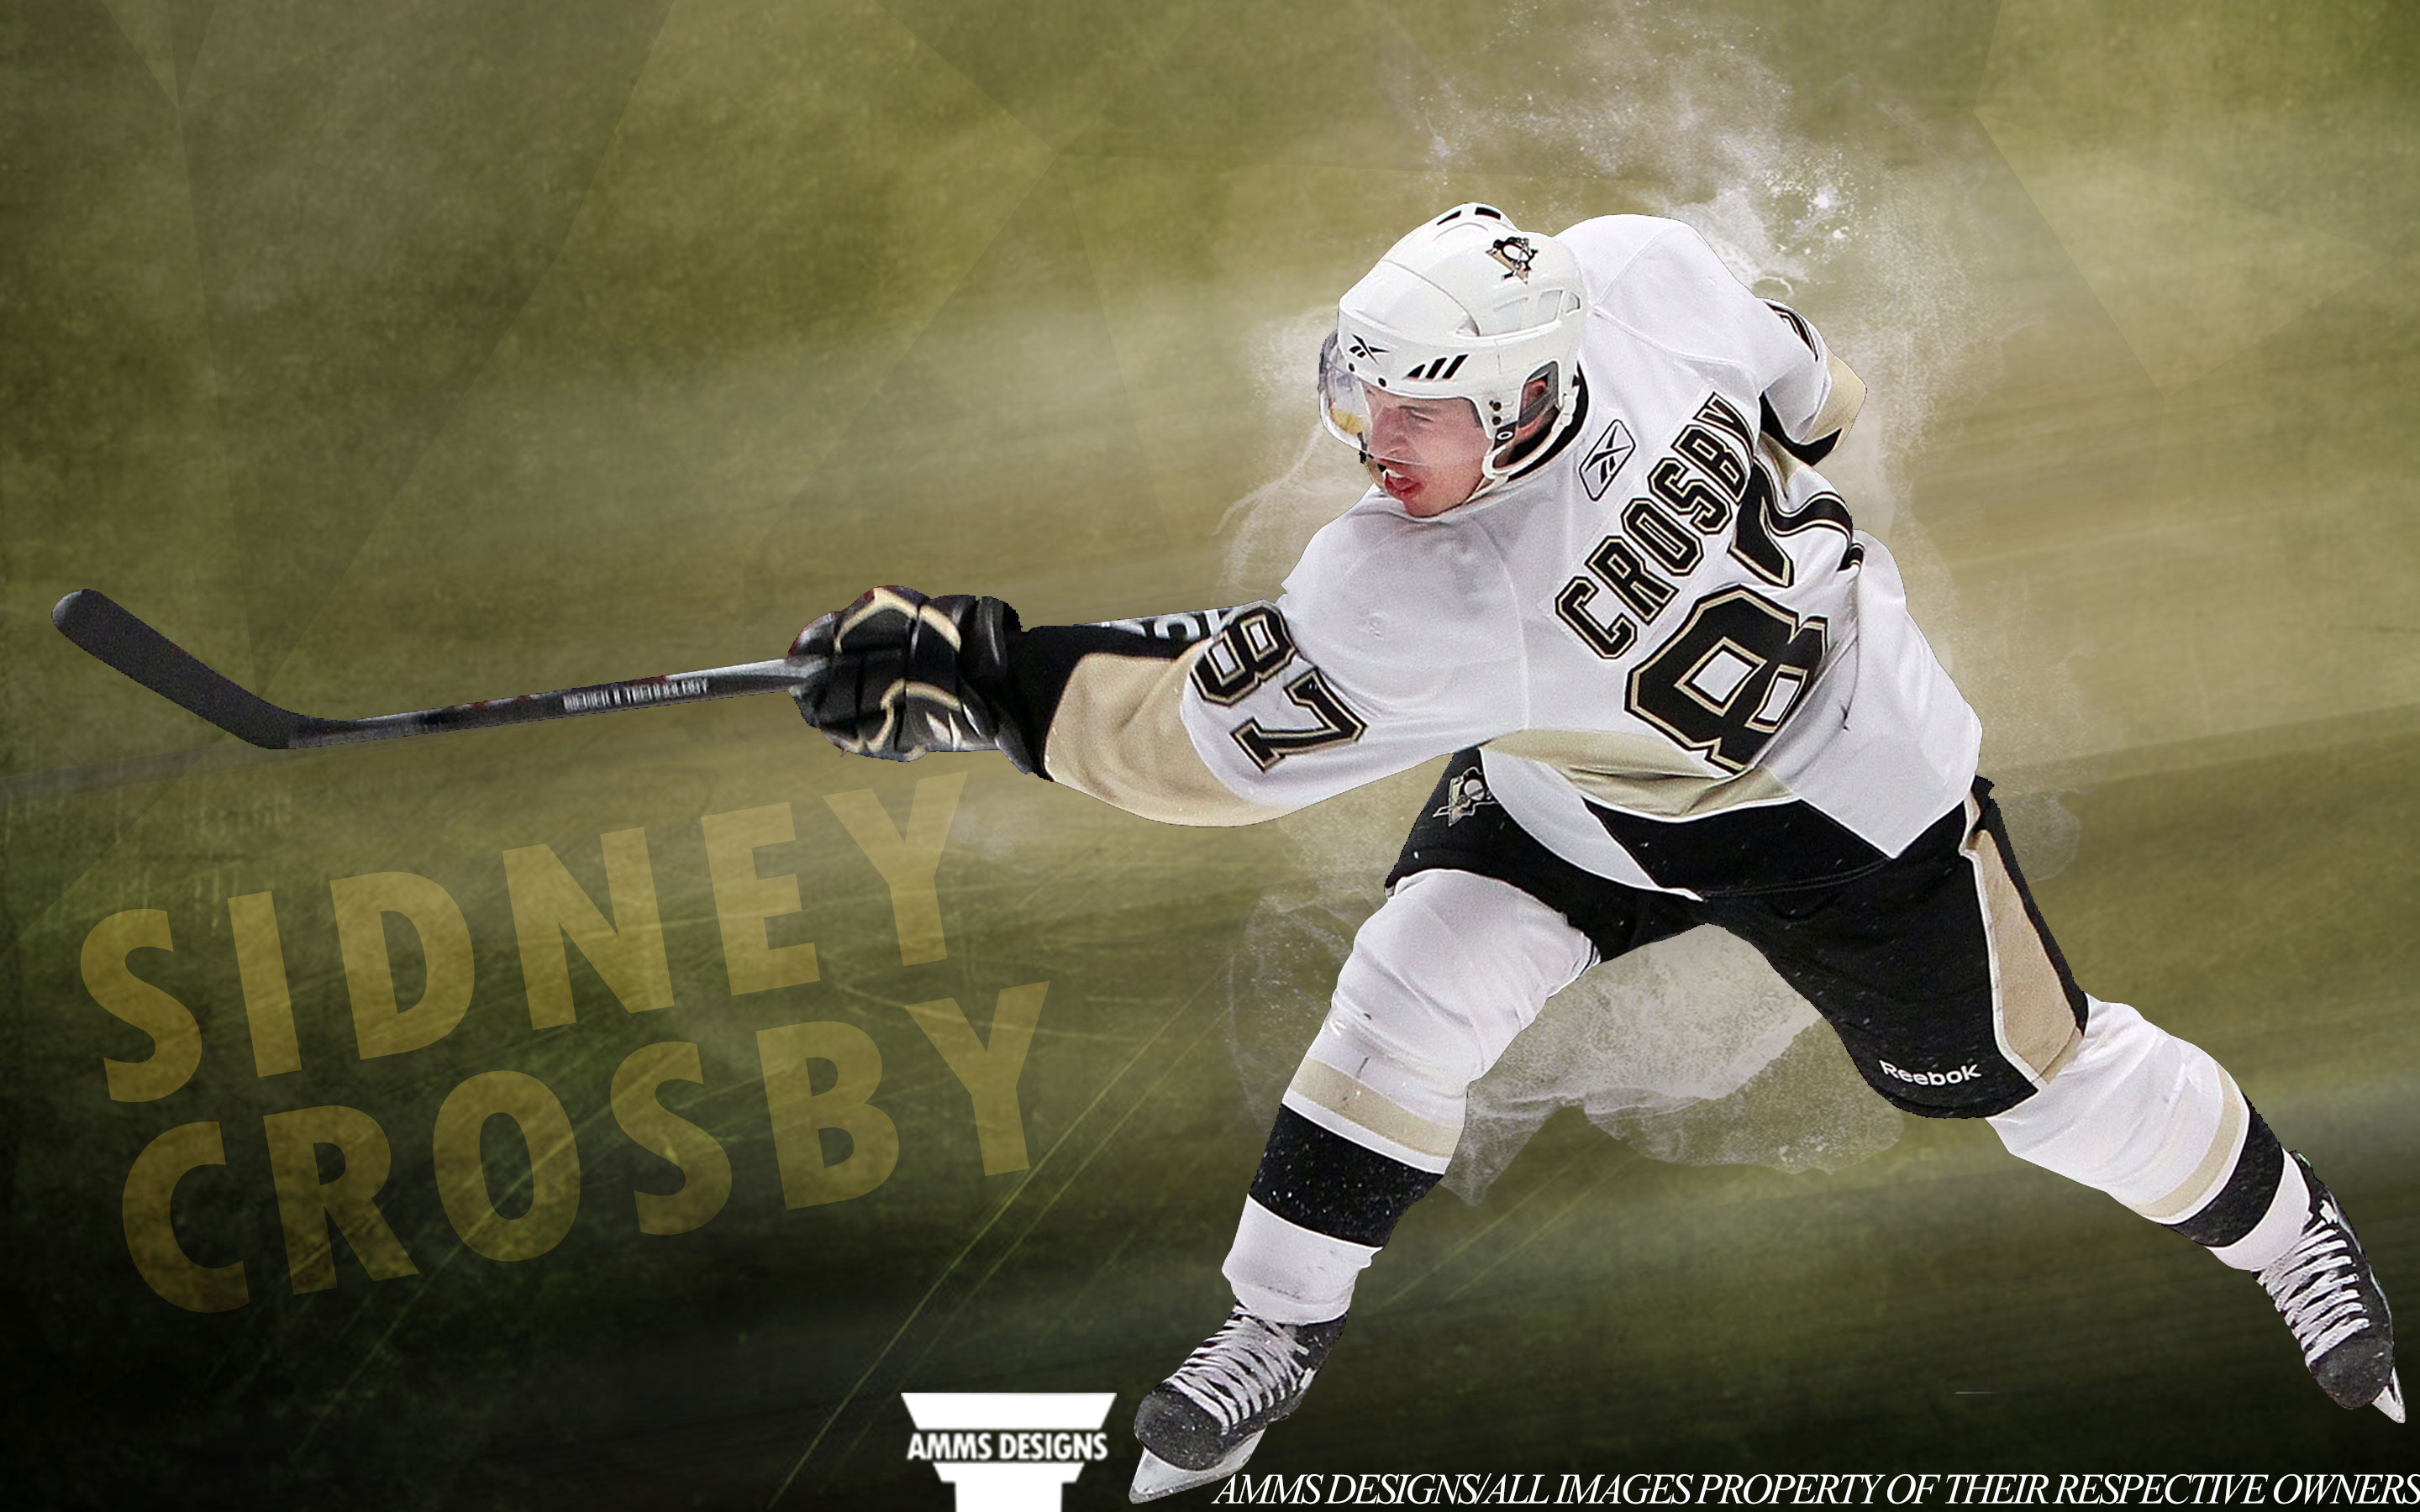 NHL Wallpapers   Sidney Crosby Pittsburgh Penguins 2014 wallpaper